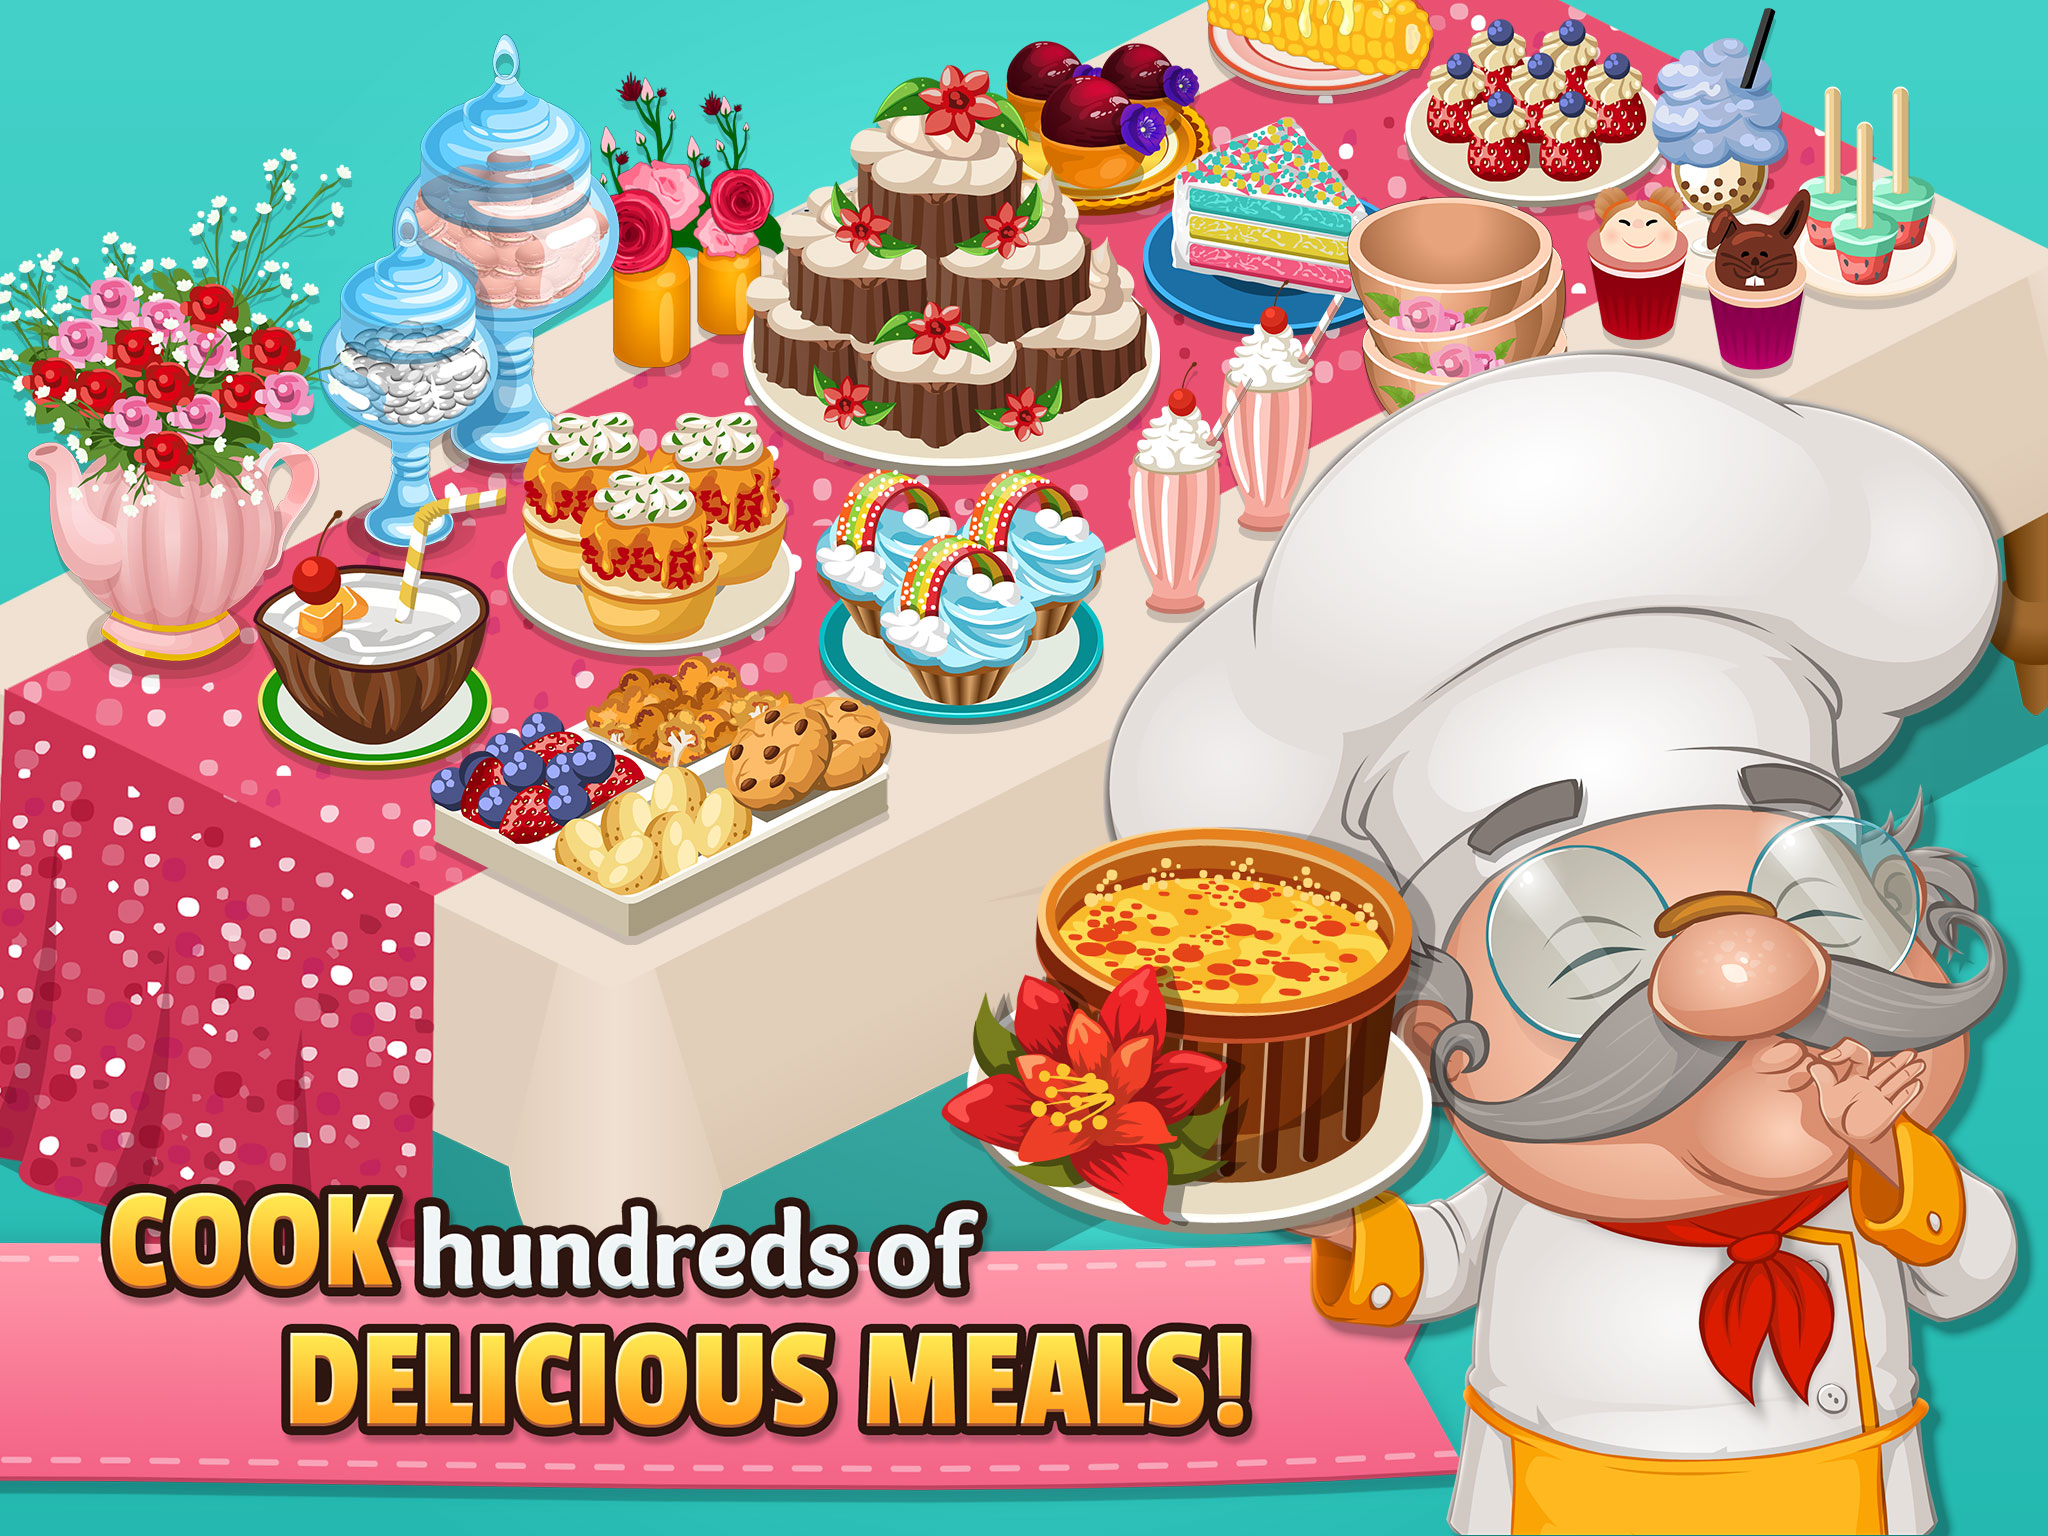 COOK hundreds of DELICIOUS MEALS!